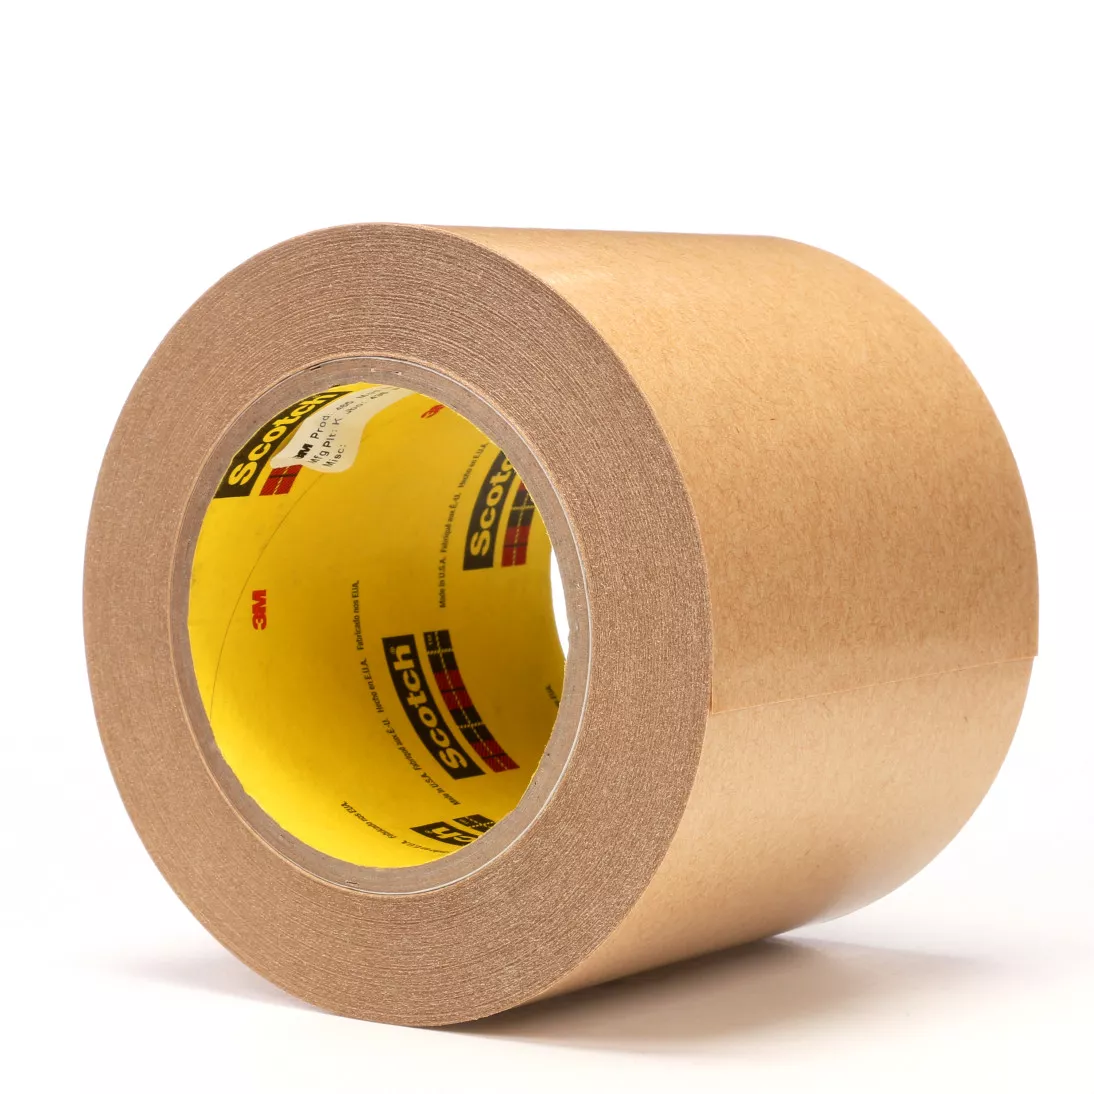 3M™ Adhesive Transfer Tape 465, Clear, 4 in x 60 yd, 2 mil, 8 rolls per
case